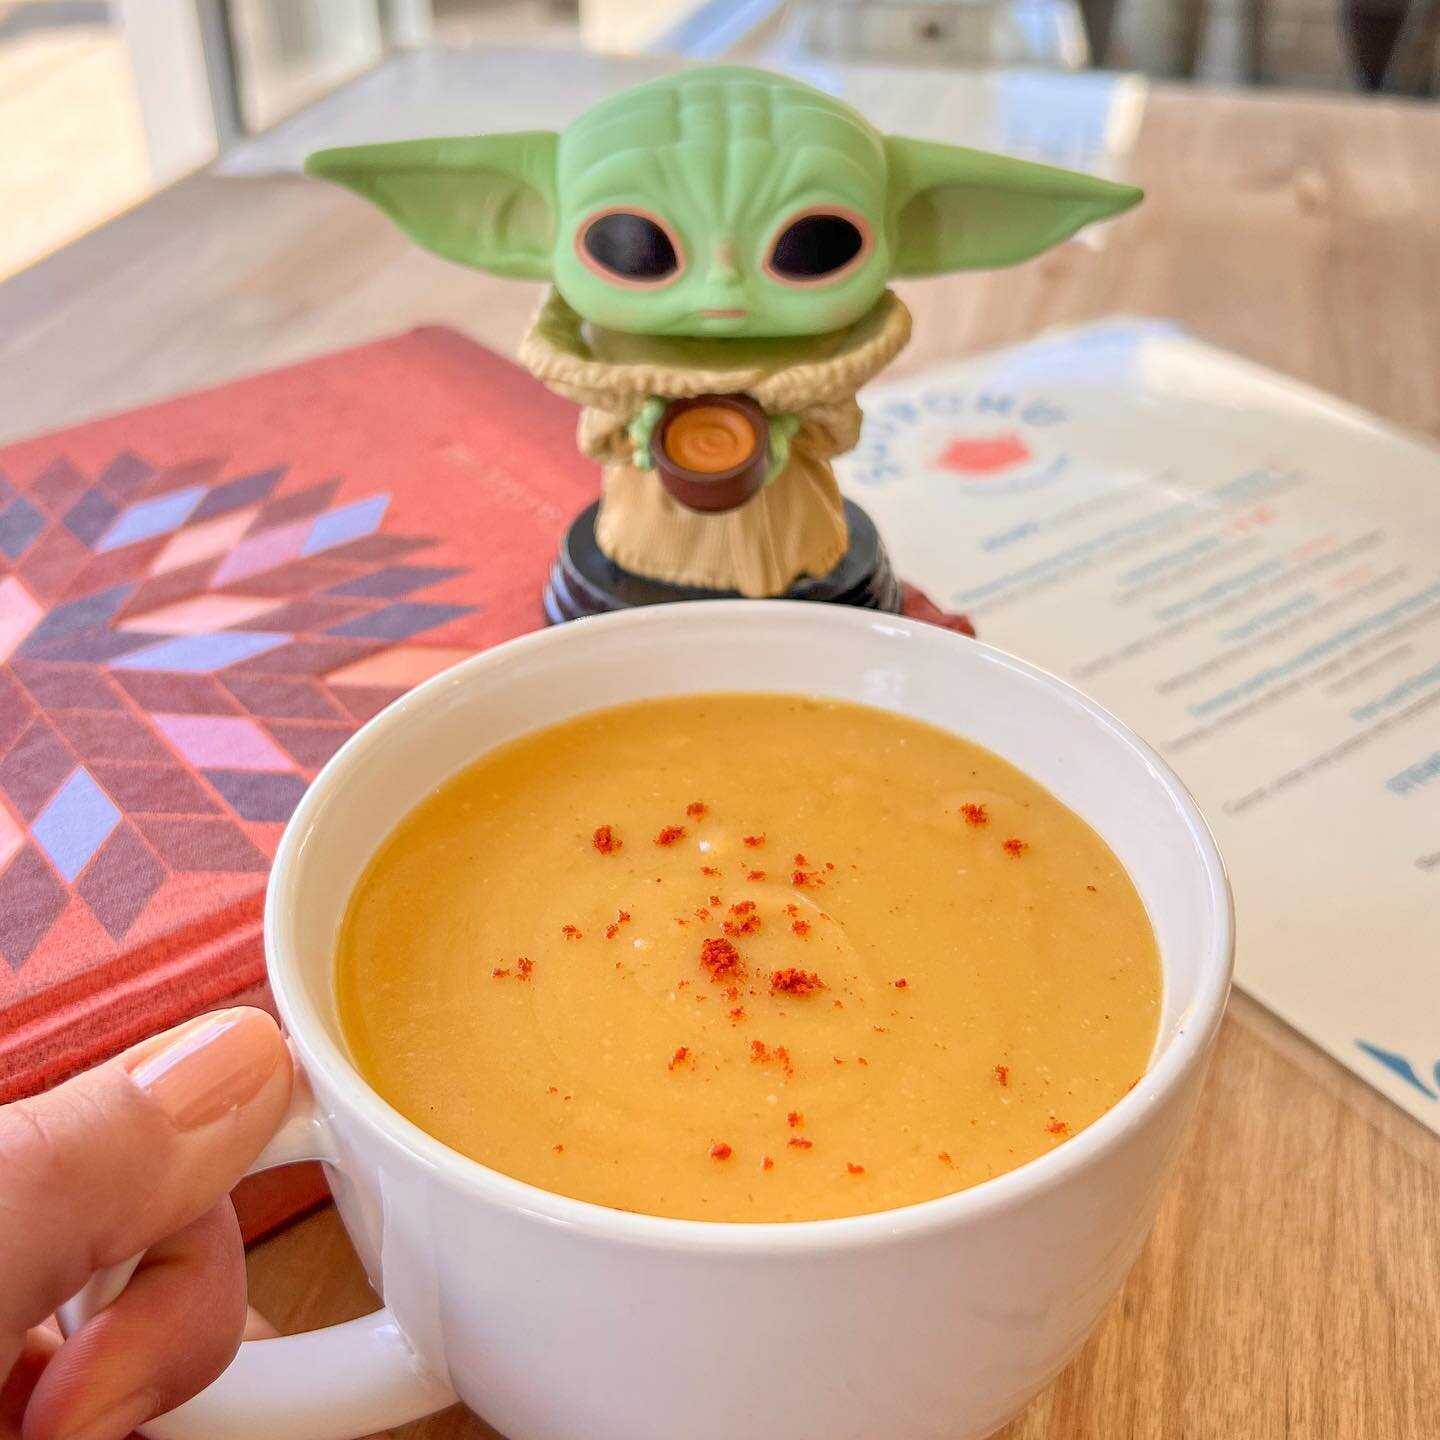 Happy #StarWarsDay!!🌌 If you're looking for a soup-buddy who is also fan of our Red Lentil Soup, Baby Yoda can be the one today 💪😋 #maythe4thbewithyou 

Order now 👉 gastroboteats.com 🛒
.
.
.
#starwars #starwarsfan #mandalorian #starwarsfigures #